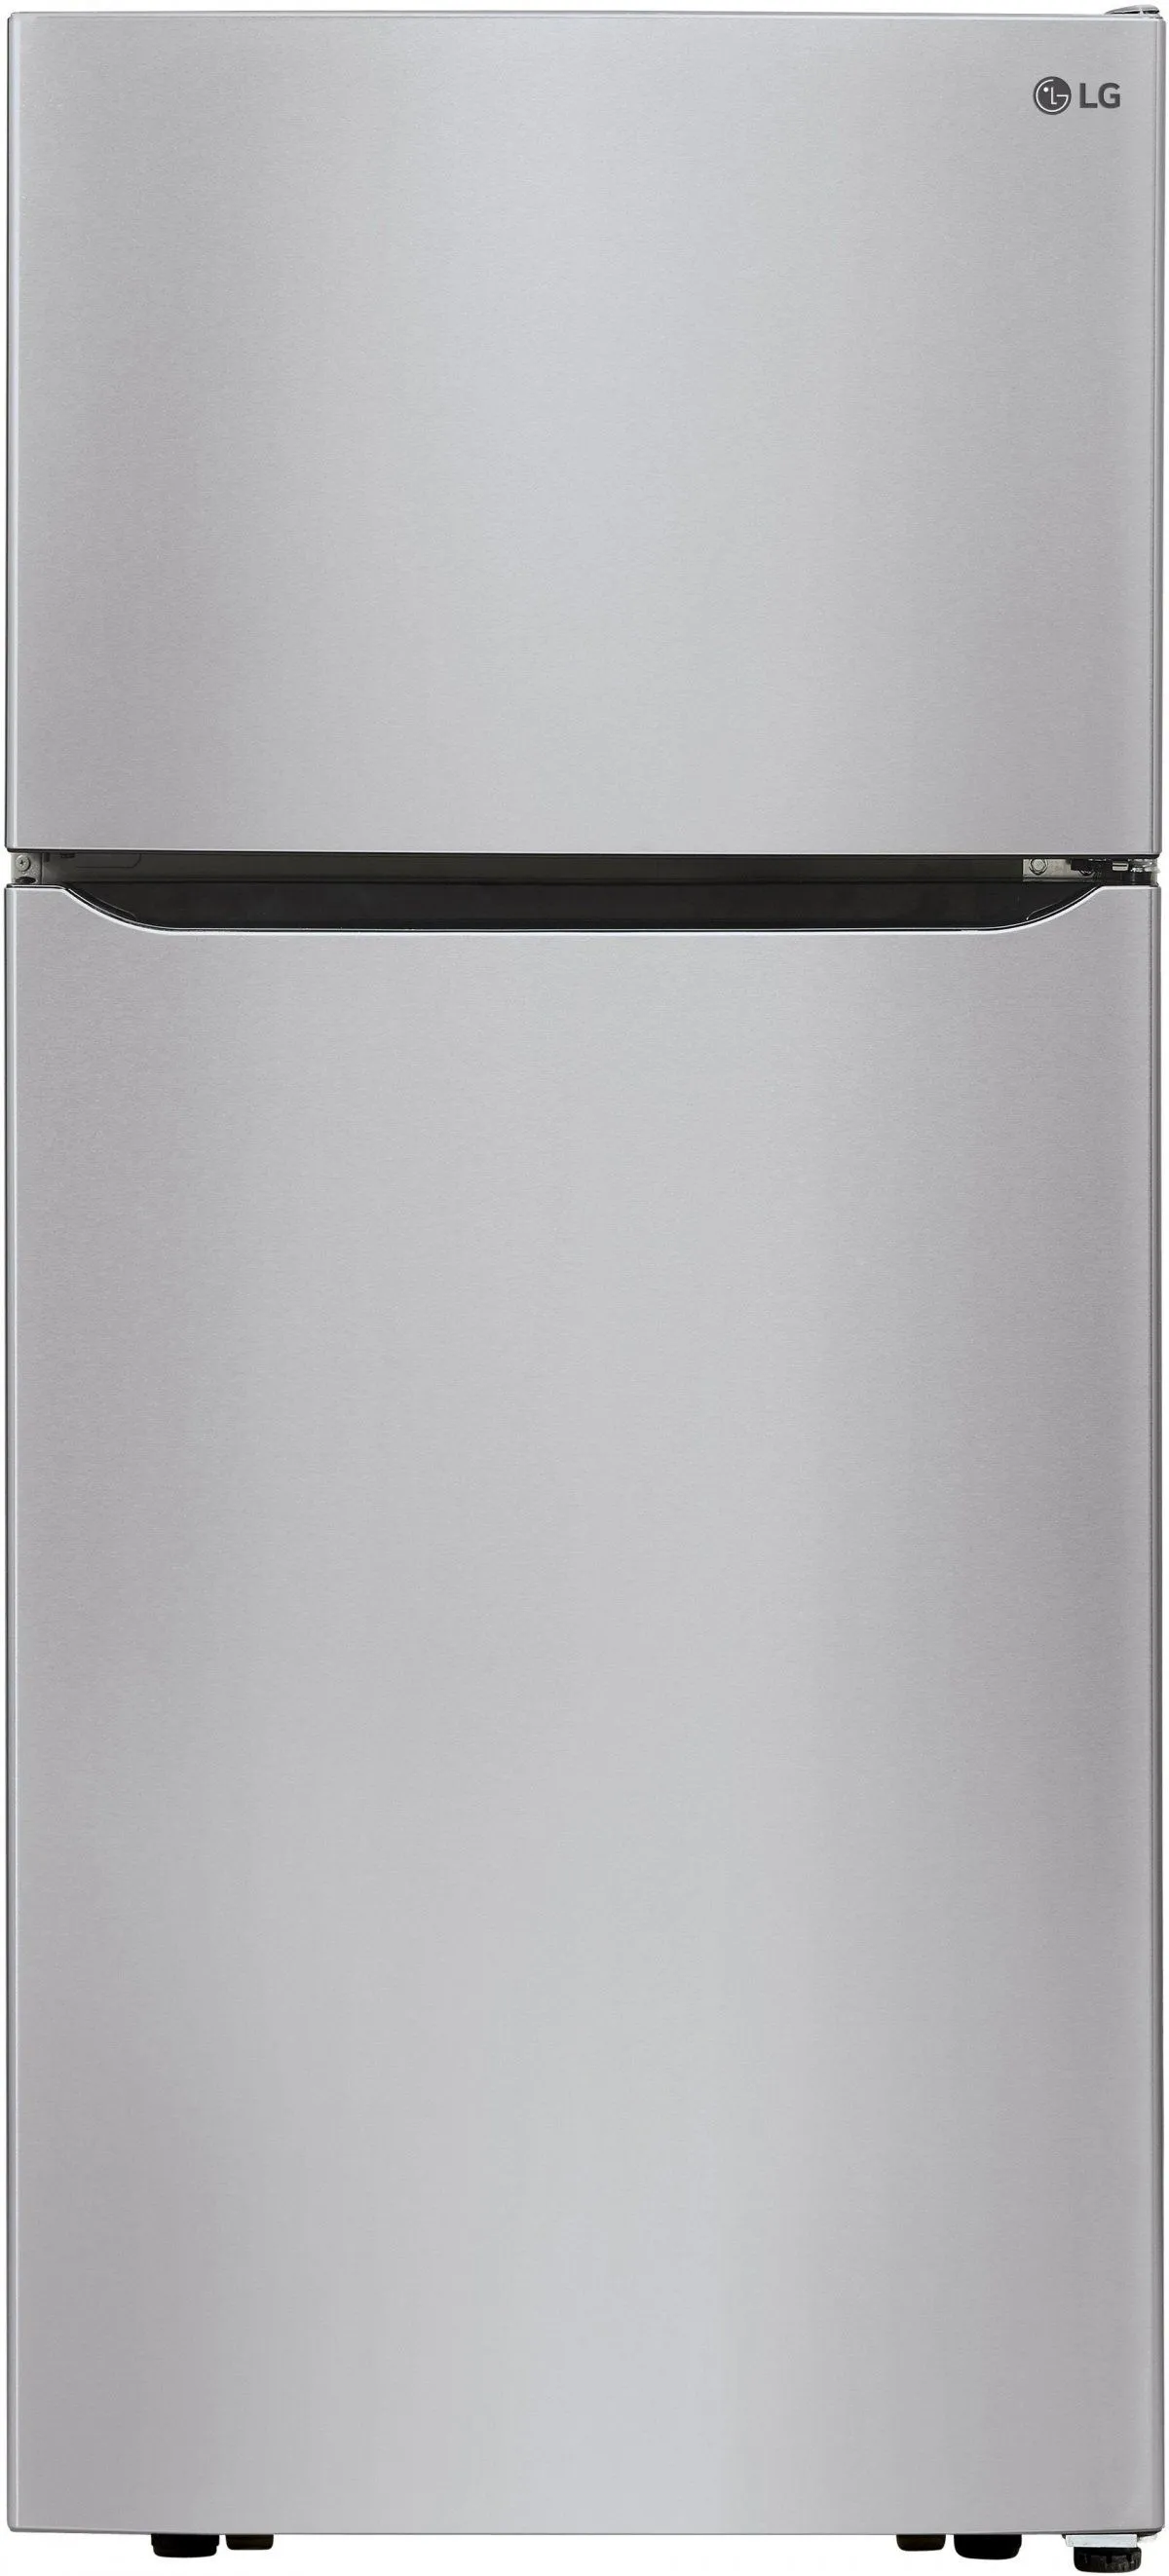 Front view of the LG LTCS20030S top freezer refrigerator 